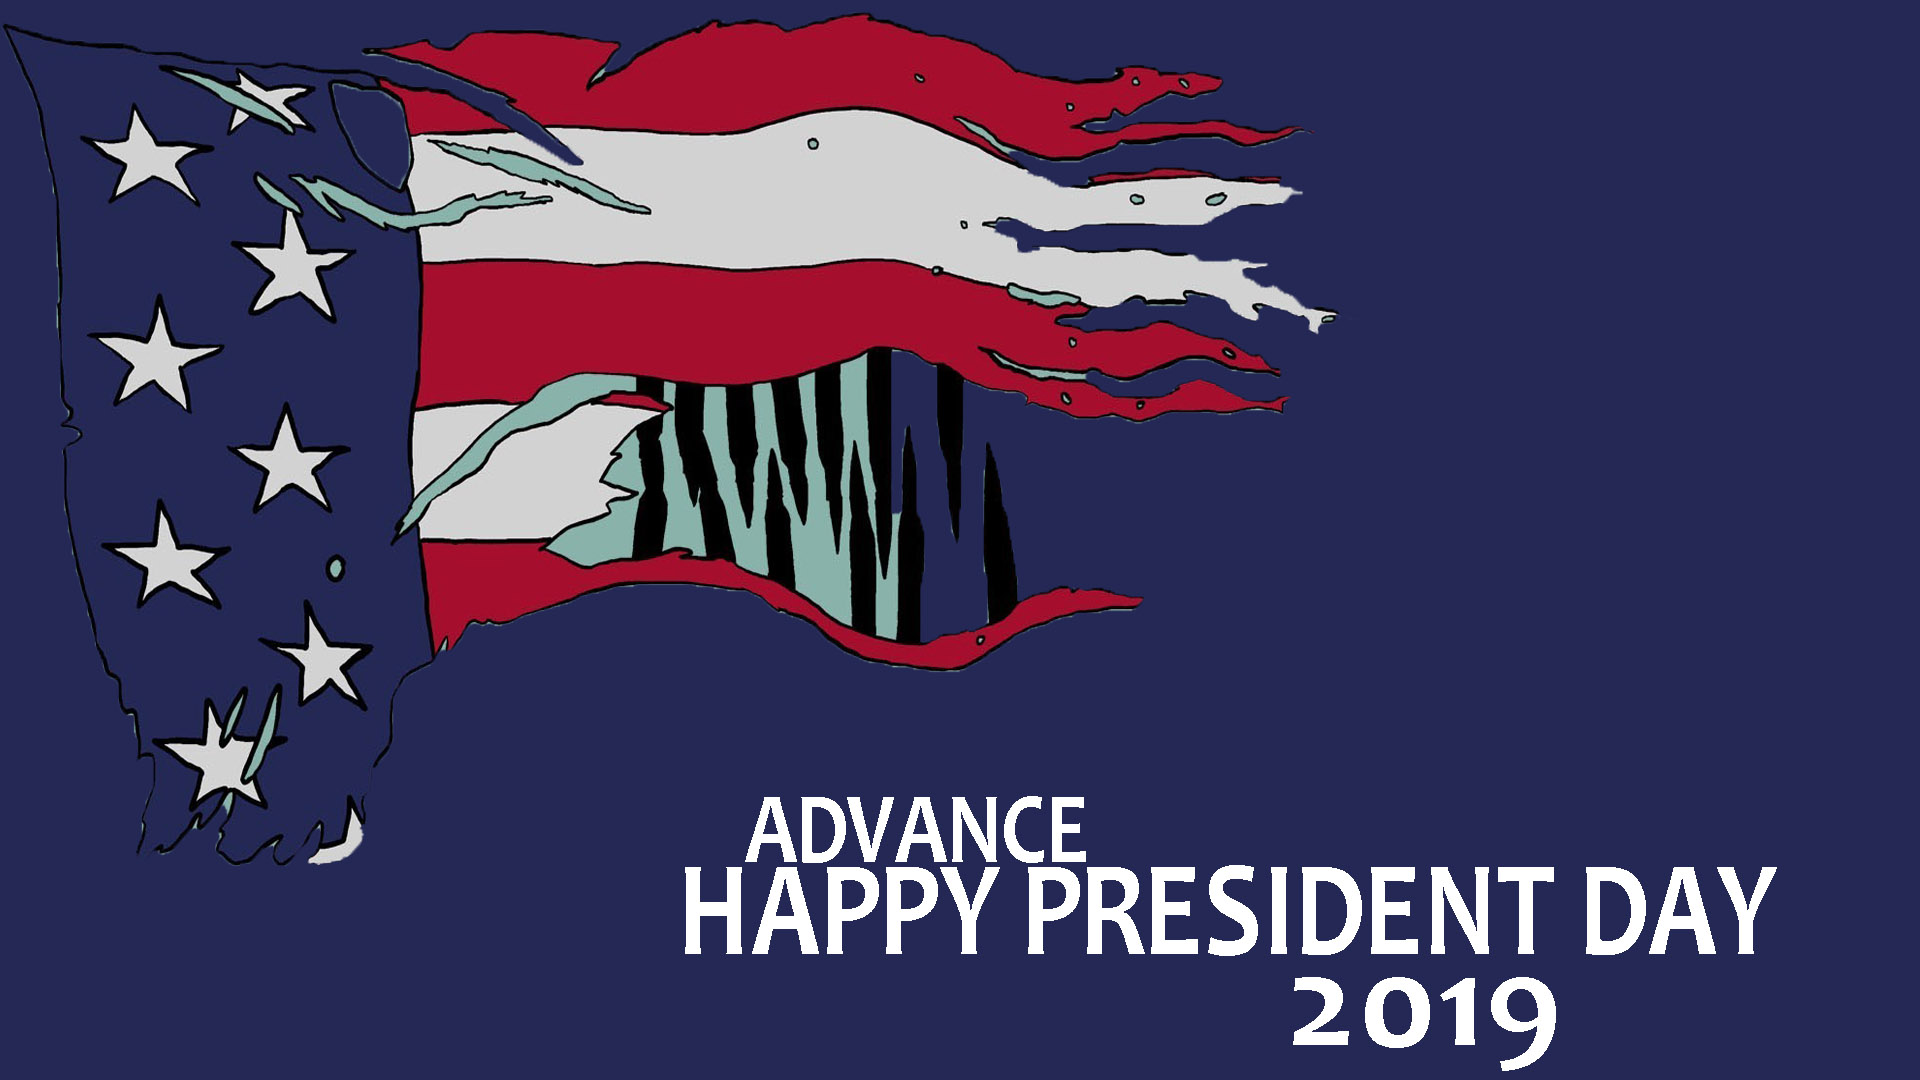 Advance Happy President Day Wishes Image Usa